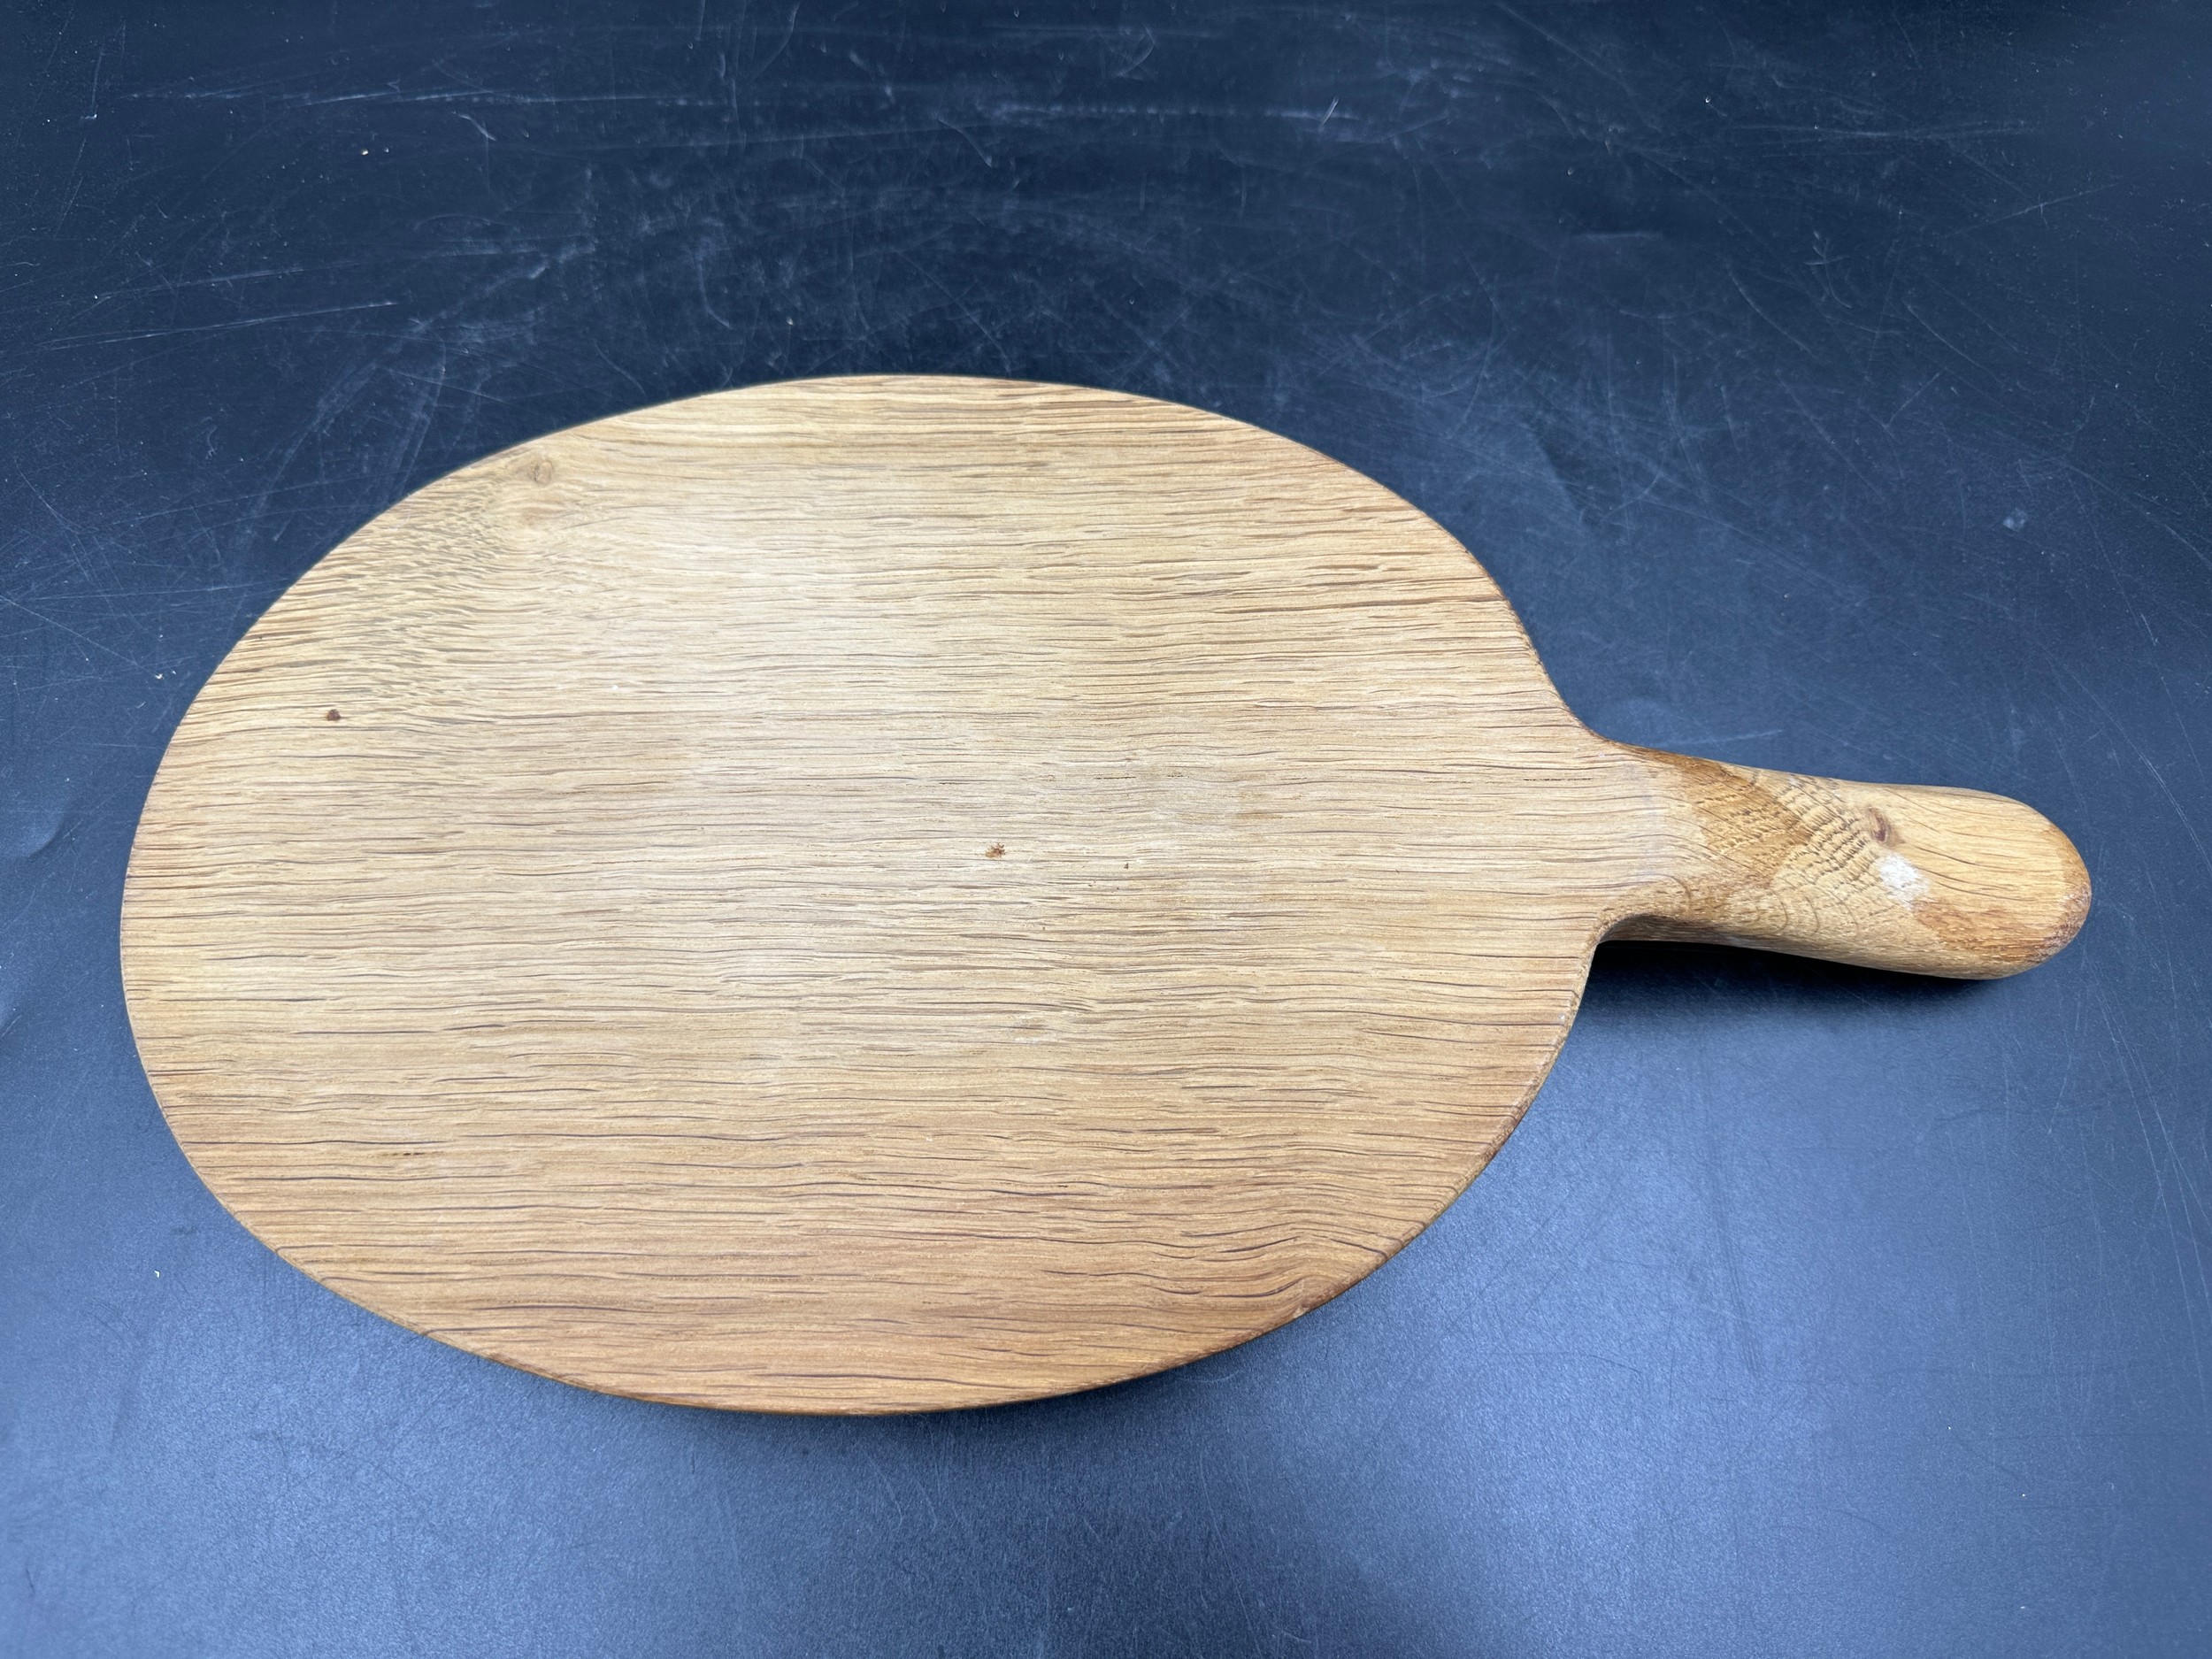 Robert Thompson 'Mouseman' of Kilburn, an adzed oak cheese board of oval form with a carved mouse - Image 4 of 5